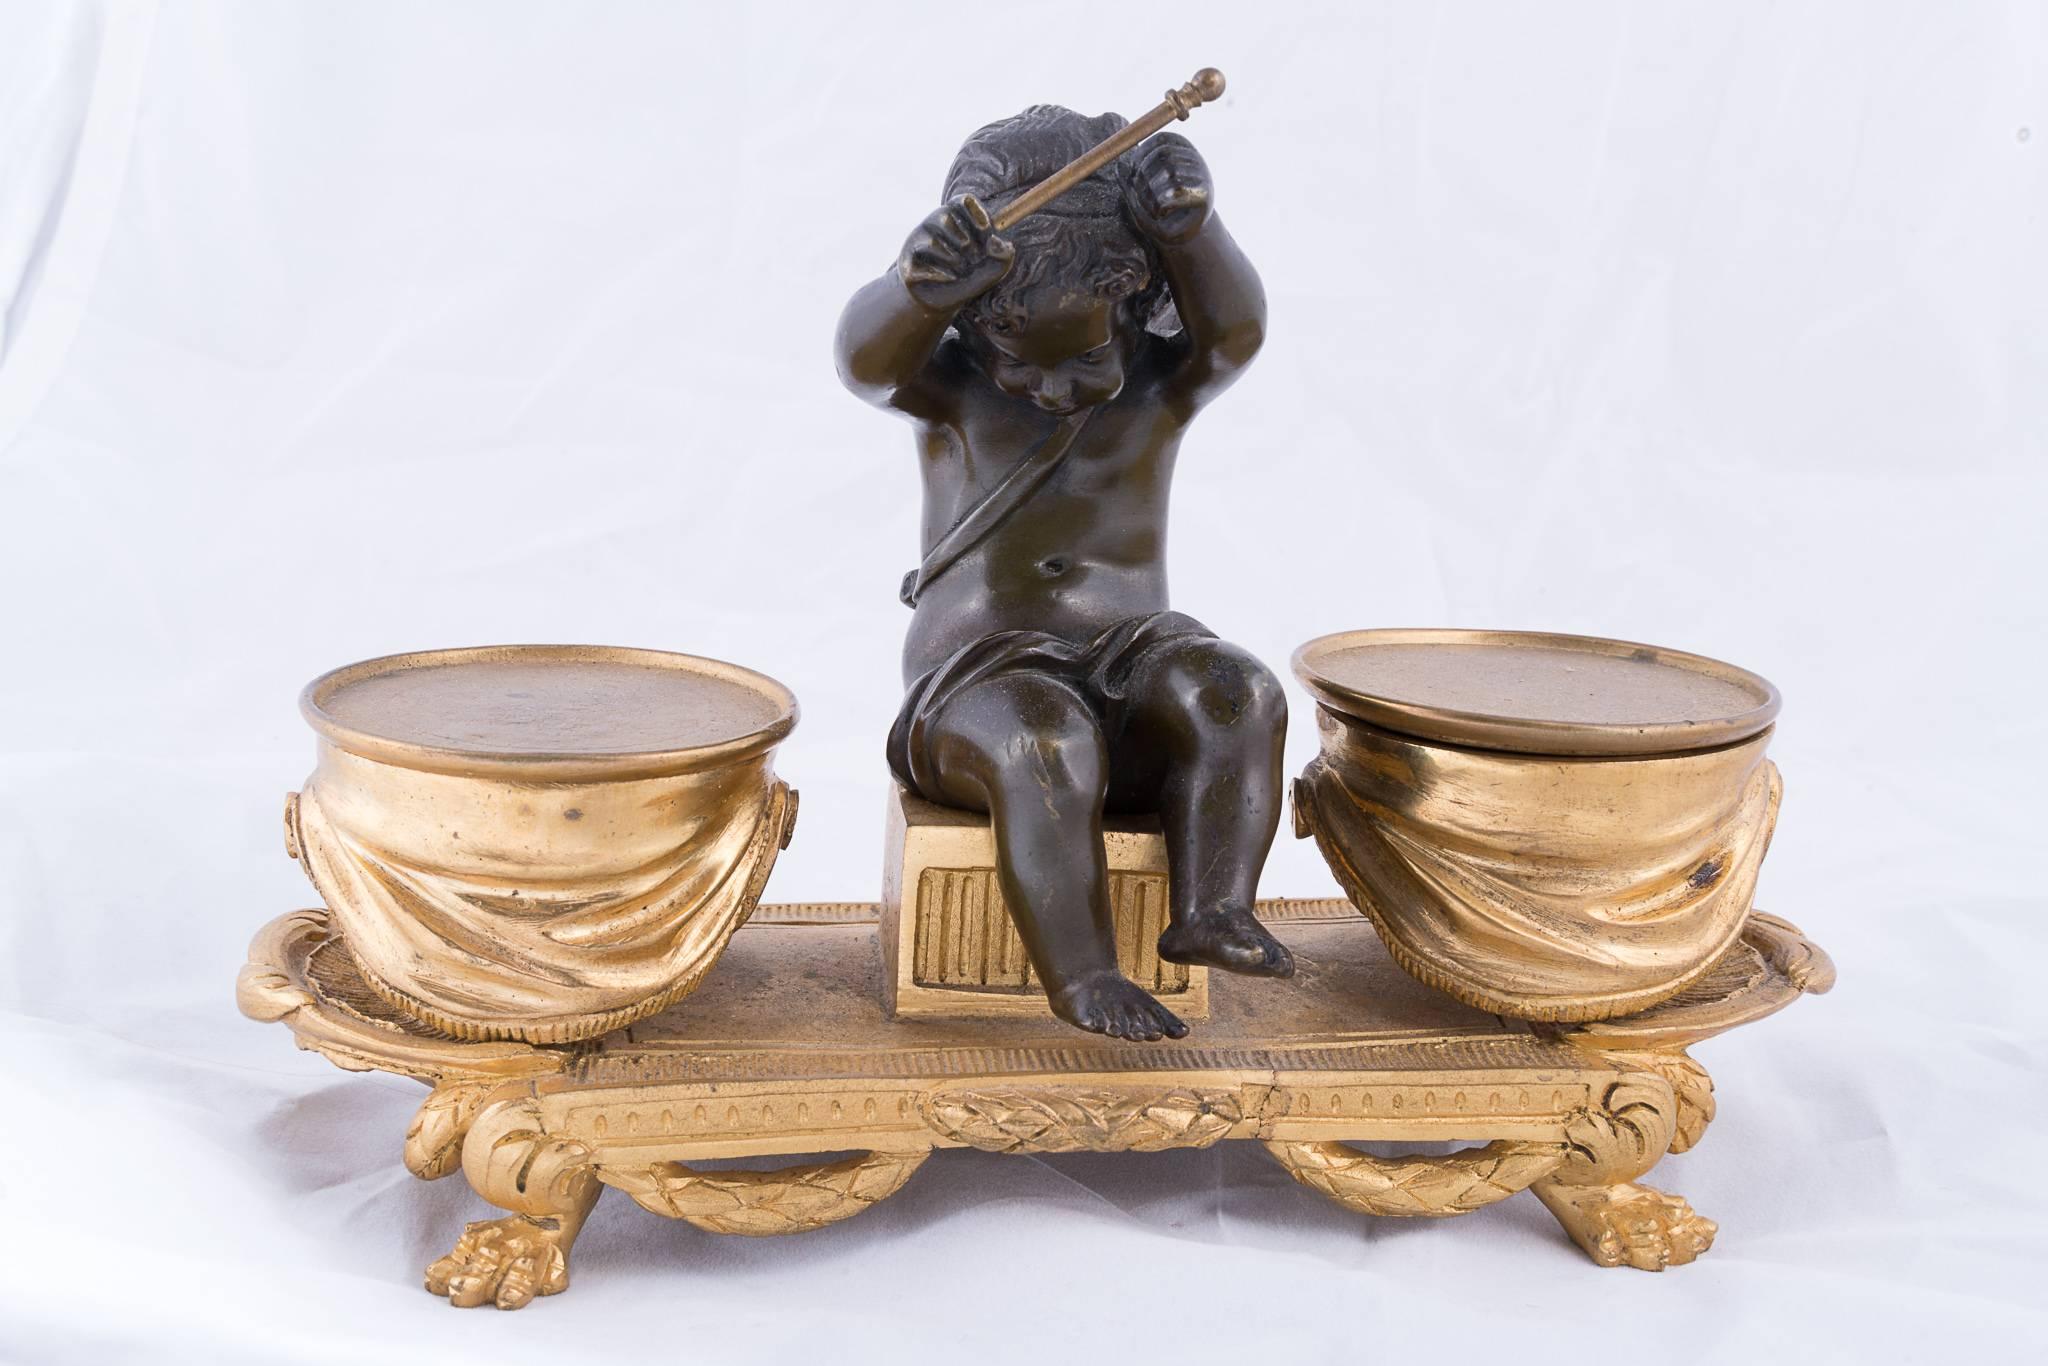 19th century bronze doré inkwell boy and dog
19th century bronze doré inkwell angel and drums.